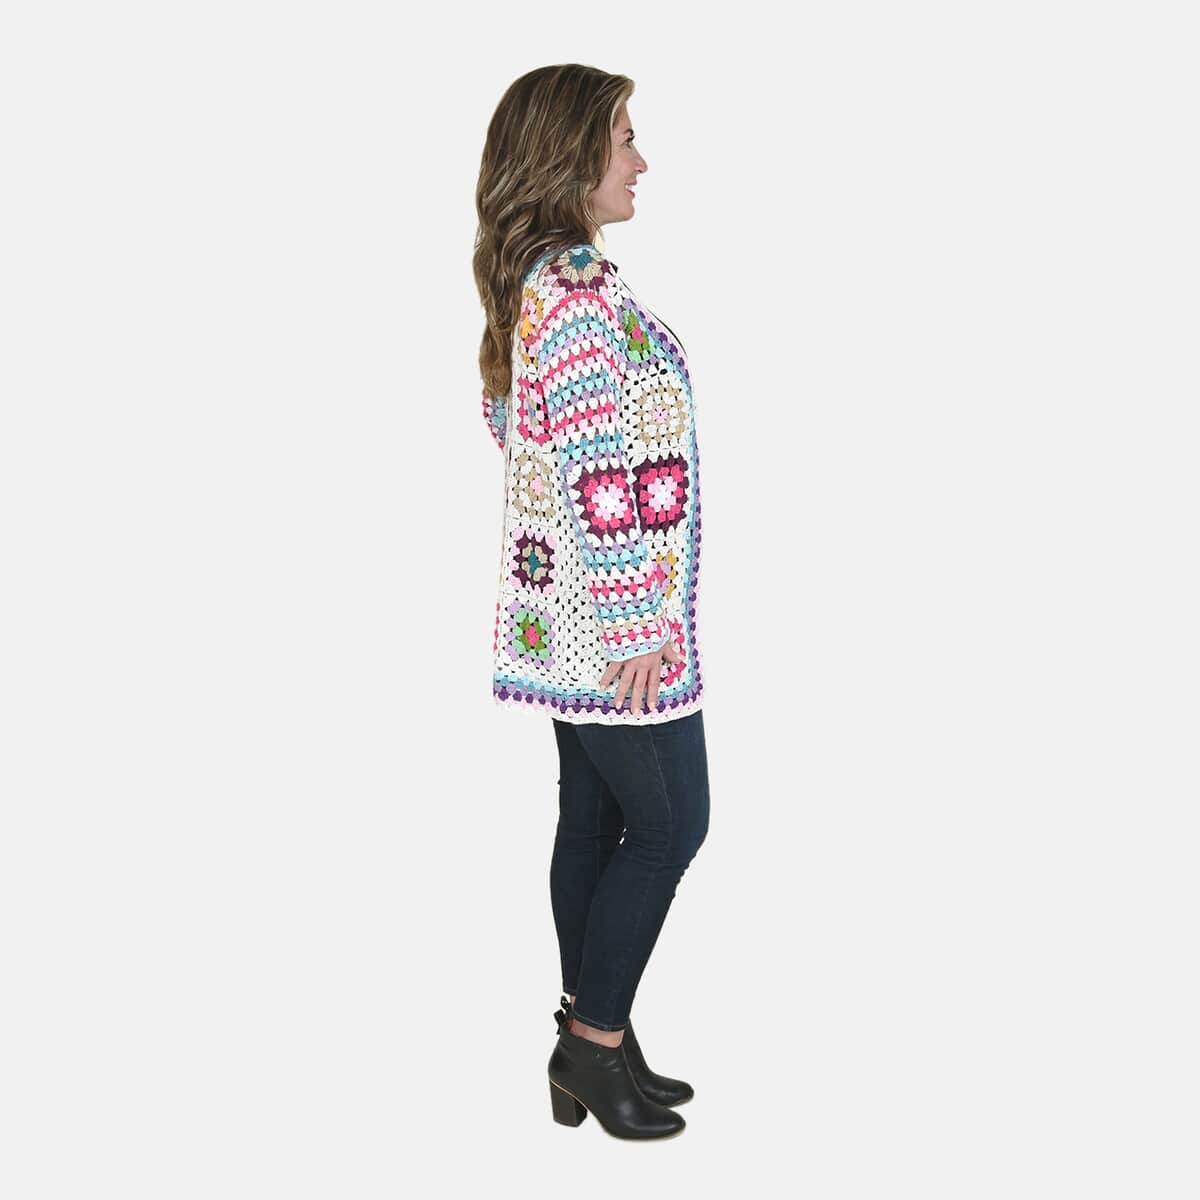 Passage 100% Cotton Crochet White and Multi Color Square Cardigan- (2X) image number 2